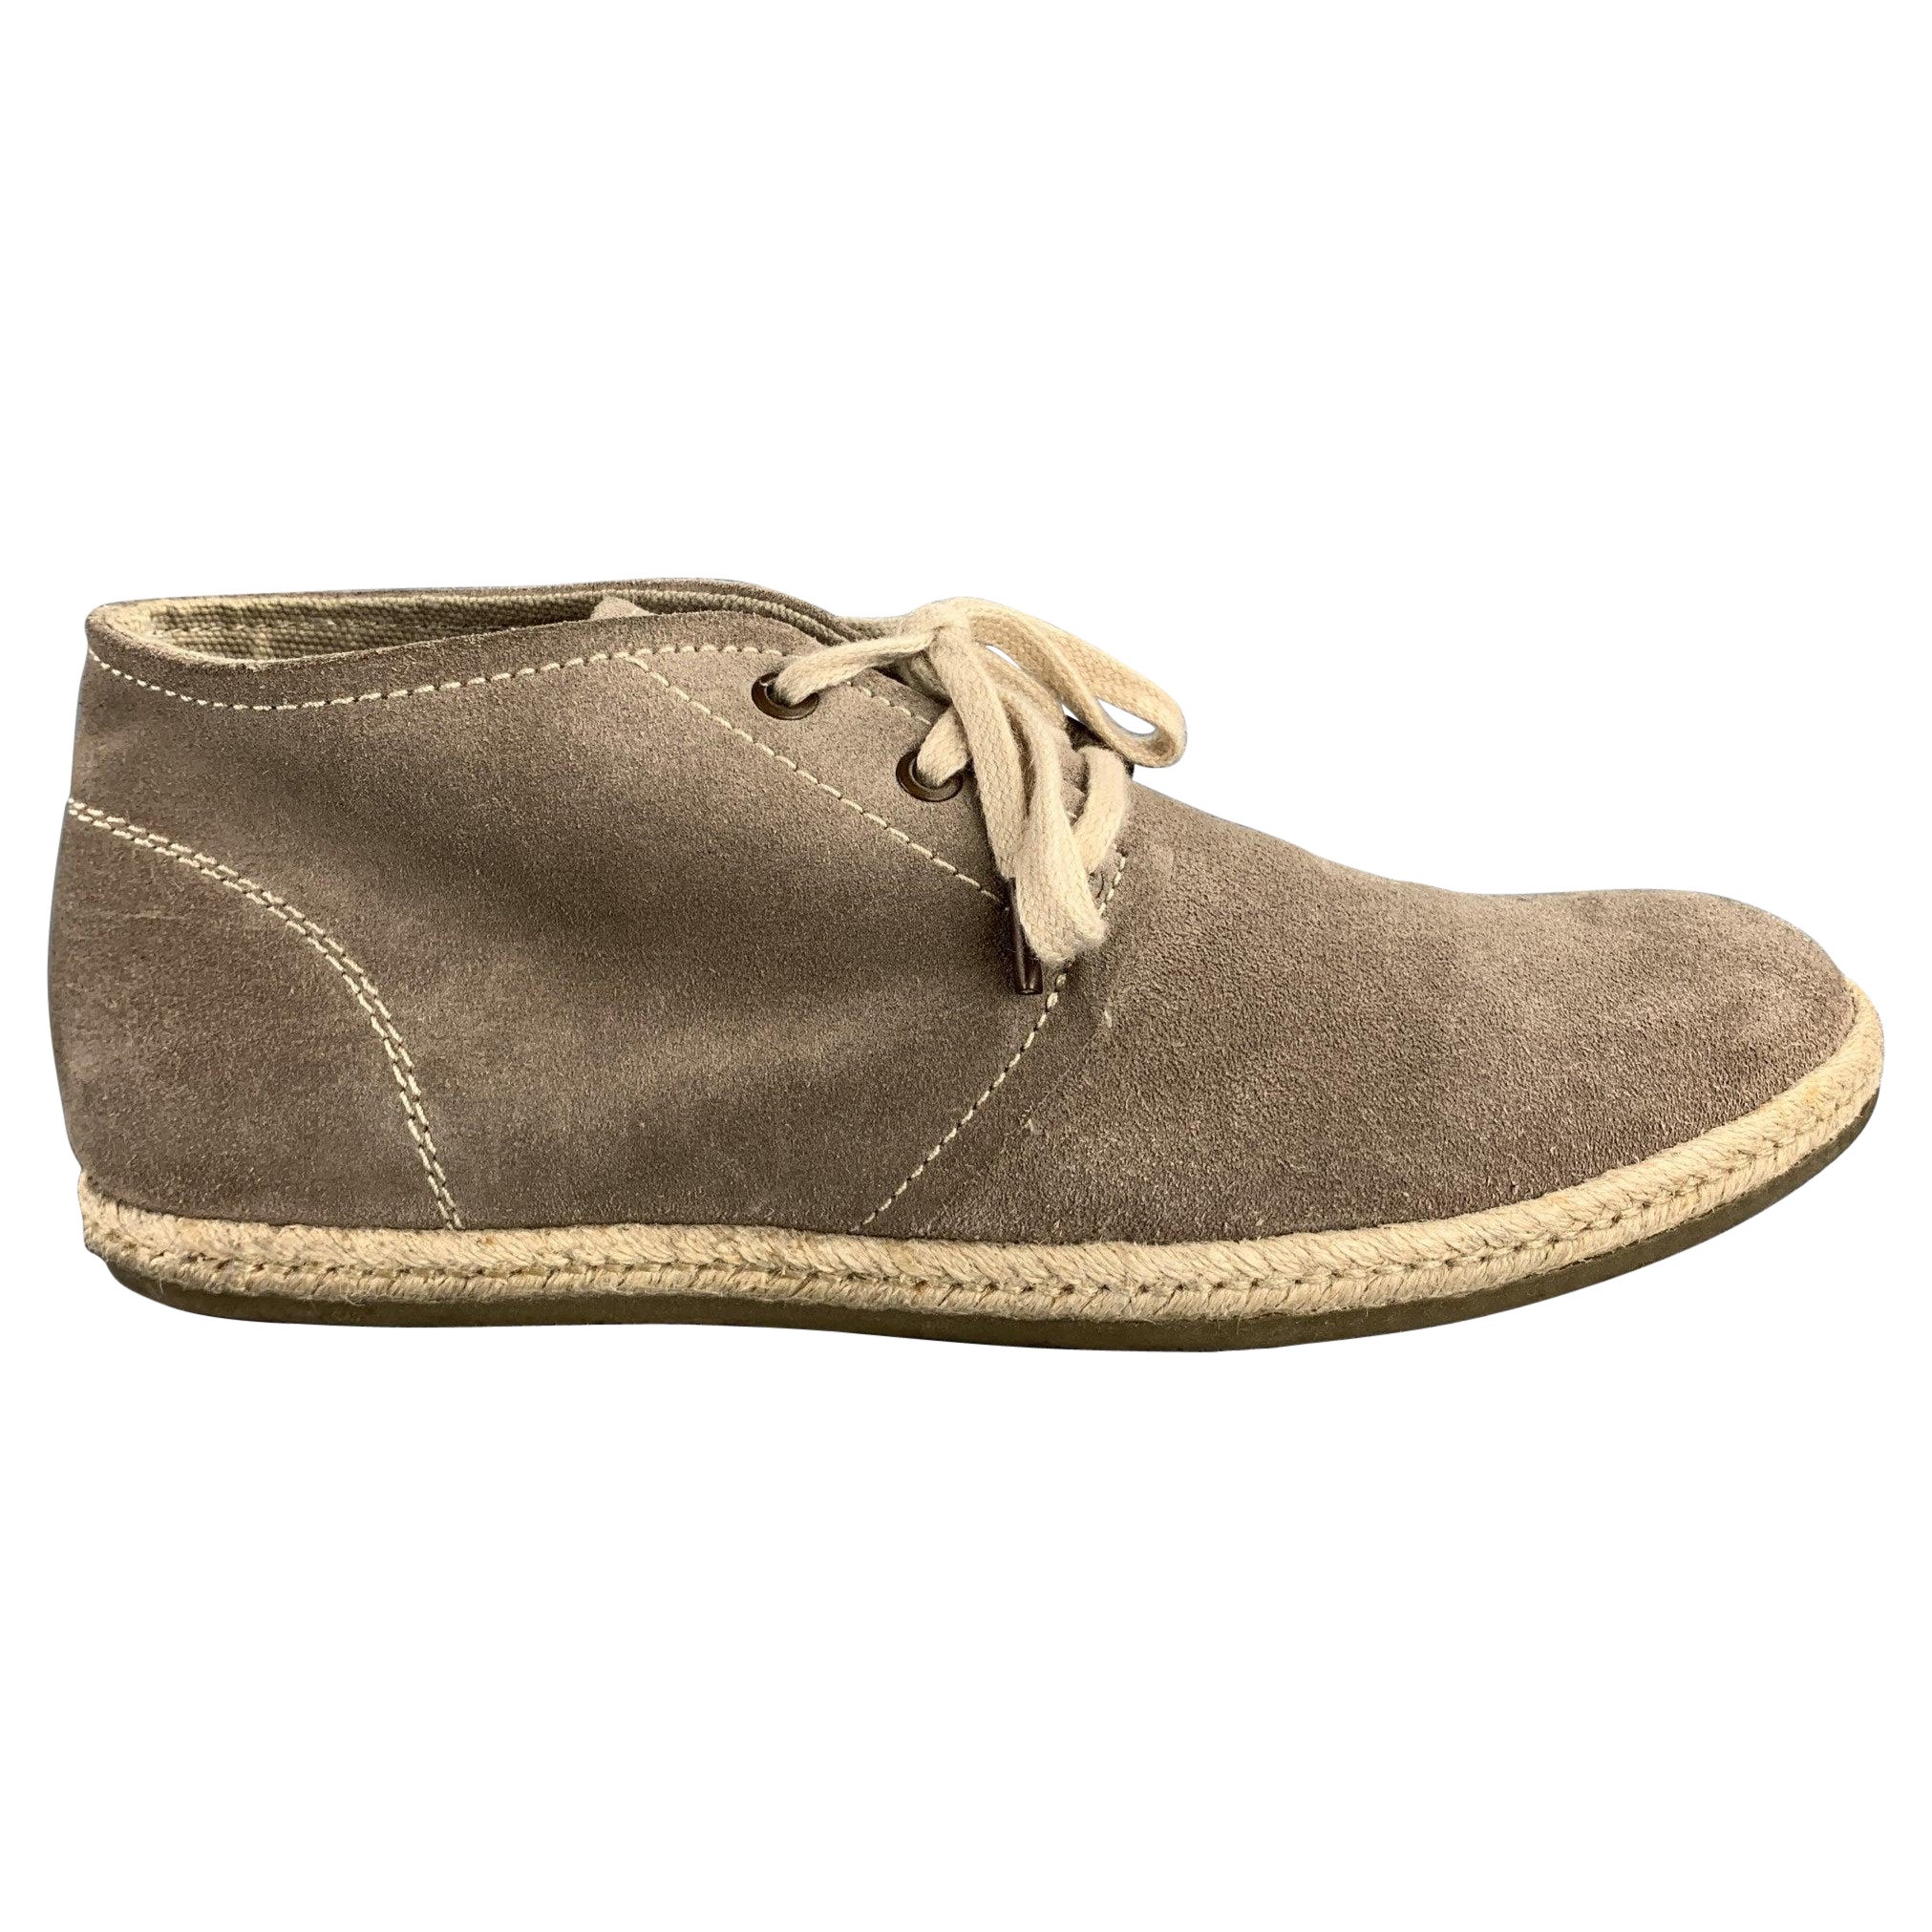 ALLSAINTS SPITALFIELDS Size 8 Taupe Suede Lace Up Chukka Boots For Sale